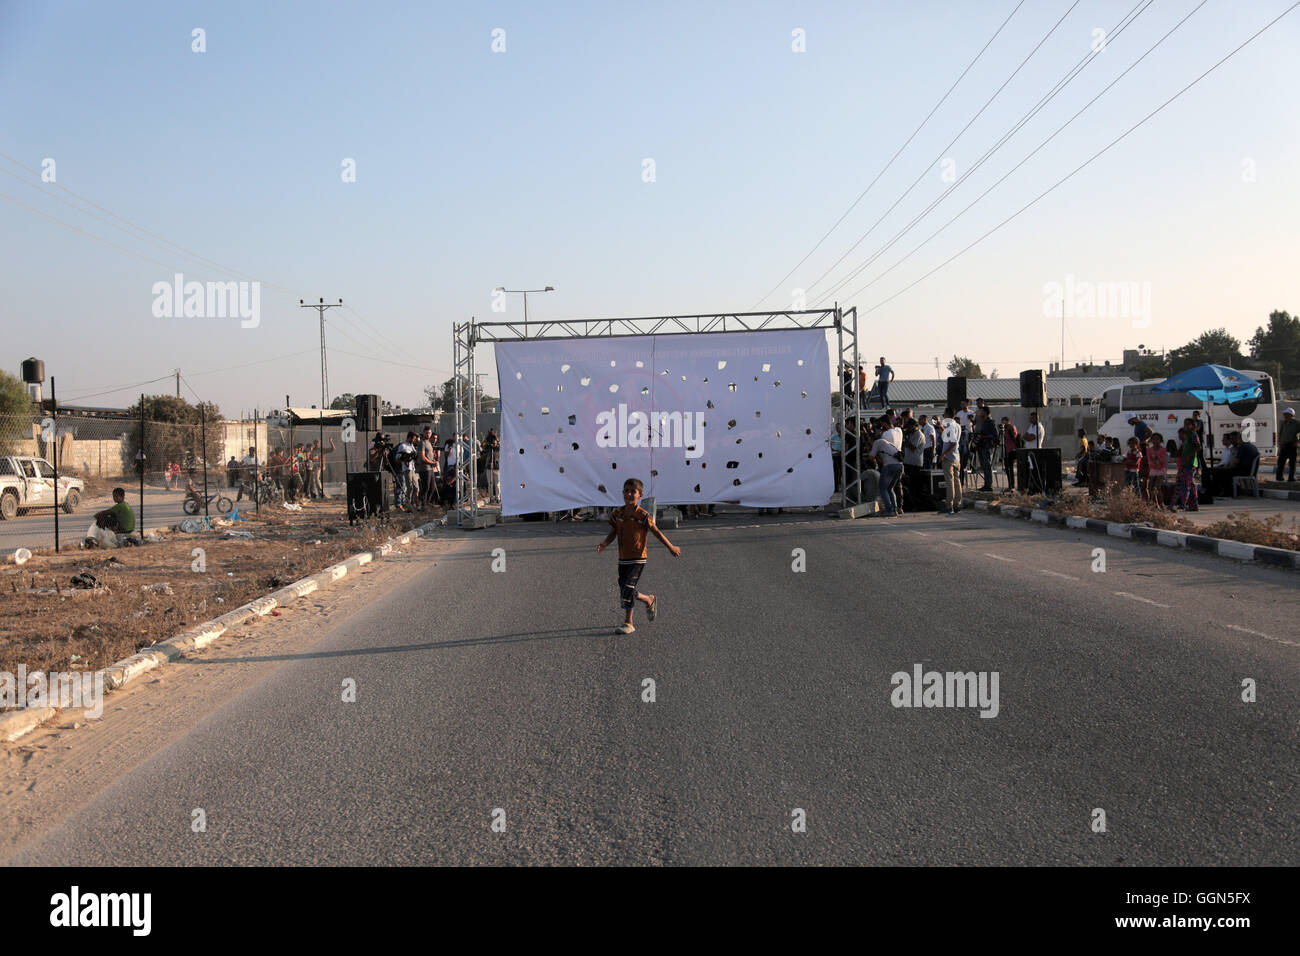 Beit Hanun, Gaza Strip. 6th August, 2016. Palestinian band Dawaween, who were denied access to perform at a festival in Jerusalem, deliver a performance as part of a protest against the denial in Beit Hanun, near the Erez crossing point with Israel, in the northern Gaza Strip on August 6, 2016. Credit:  Mohammed zaanoun/Alamy Live News Stock Photo